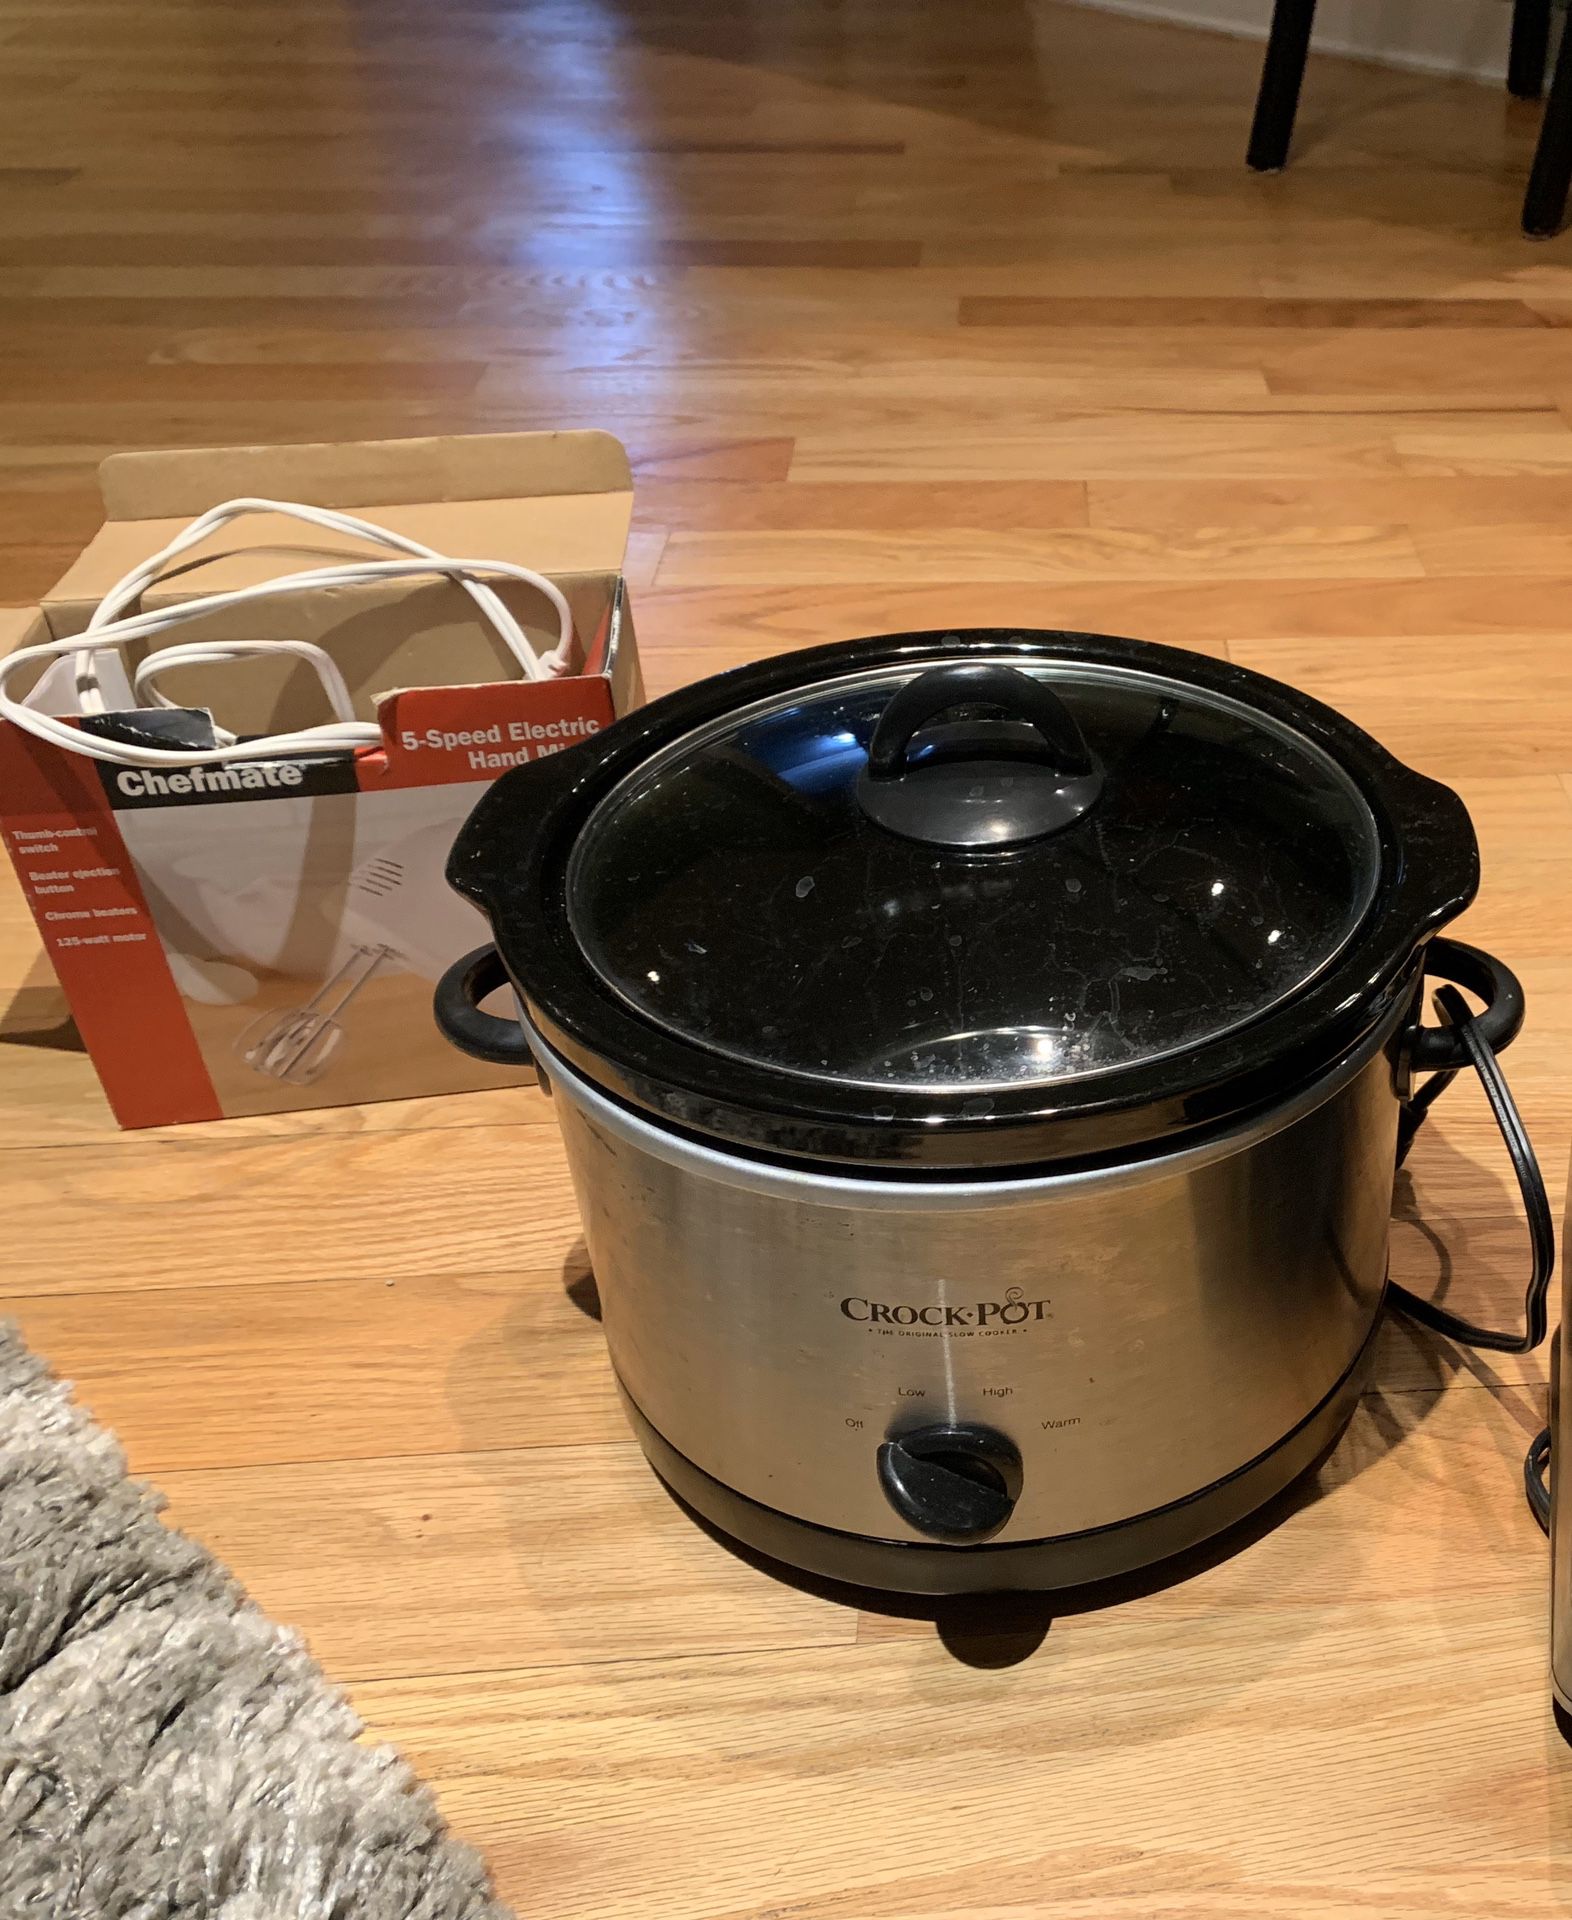 Kitchen Appliances: hand mixer and slow cooker